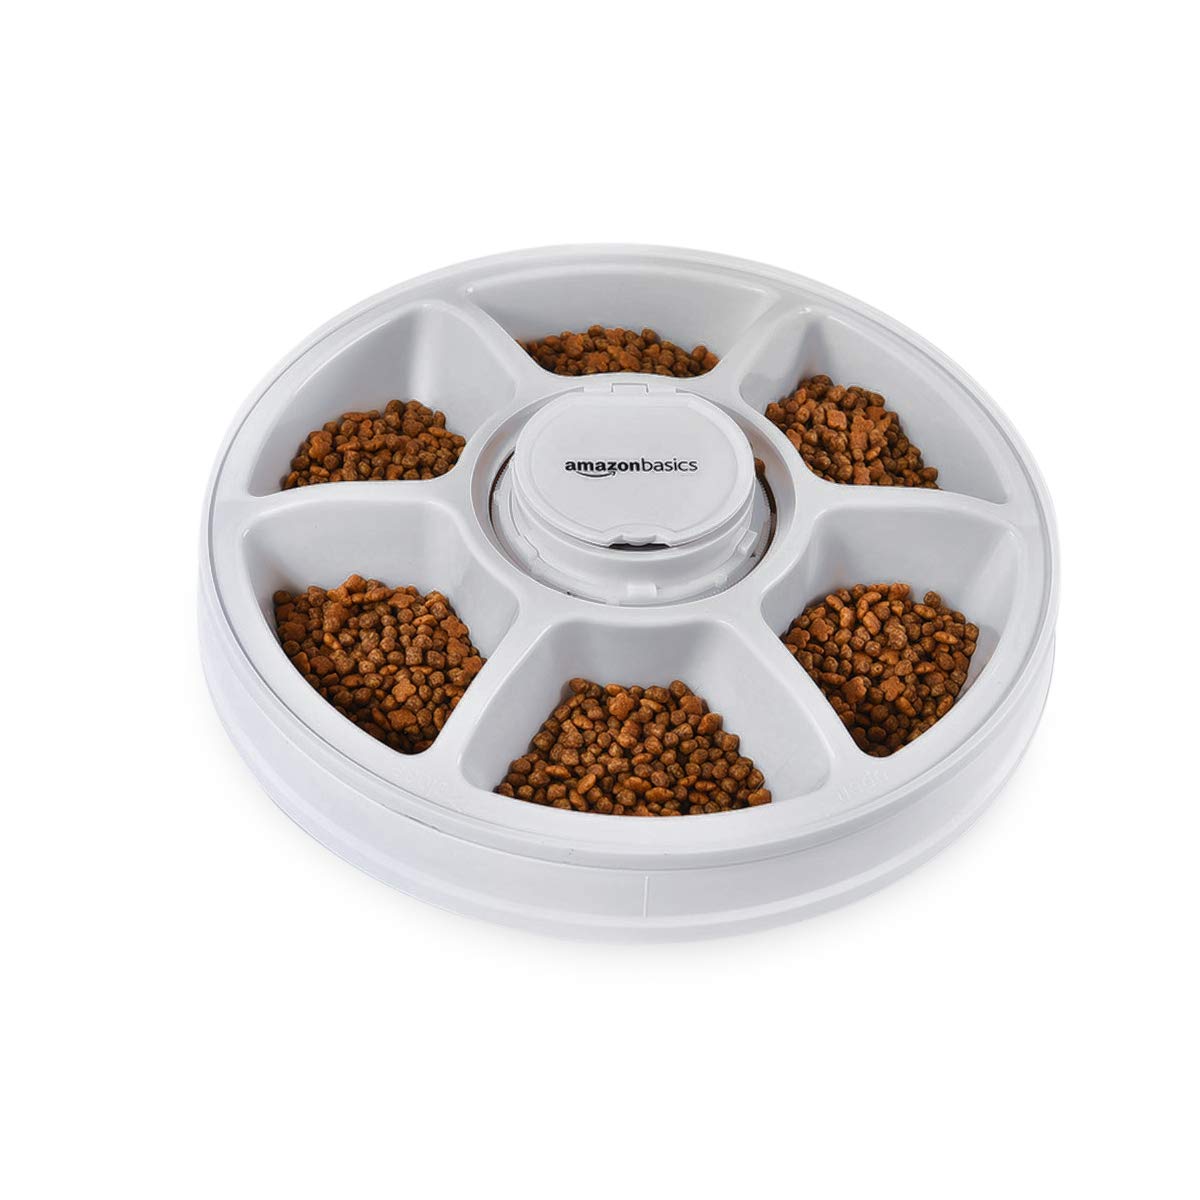 Amazon Basics Automatic Electronic Timed Pet Feeder - 6 Portions, Plastic, Teal